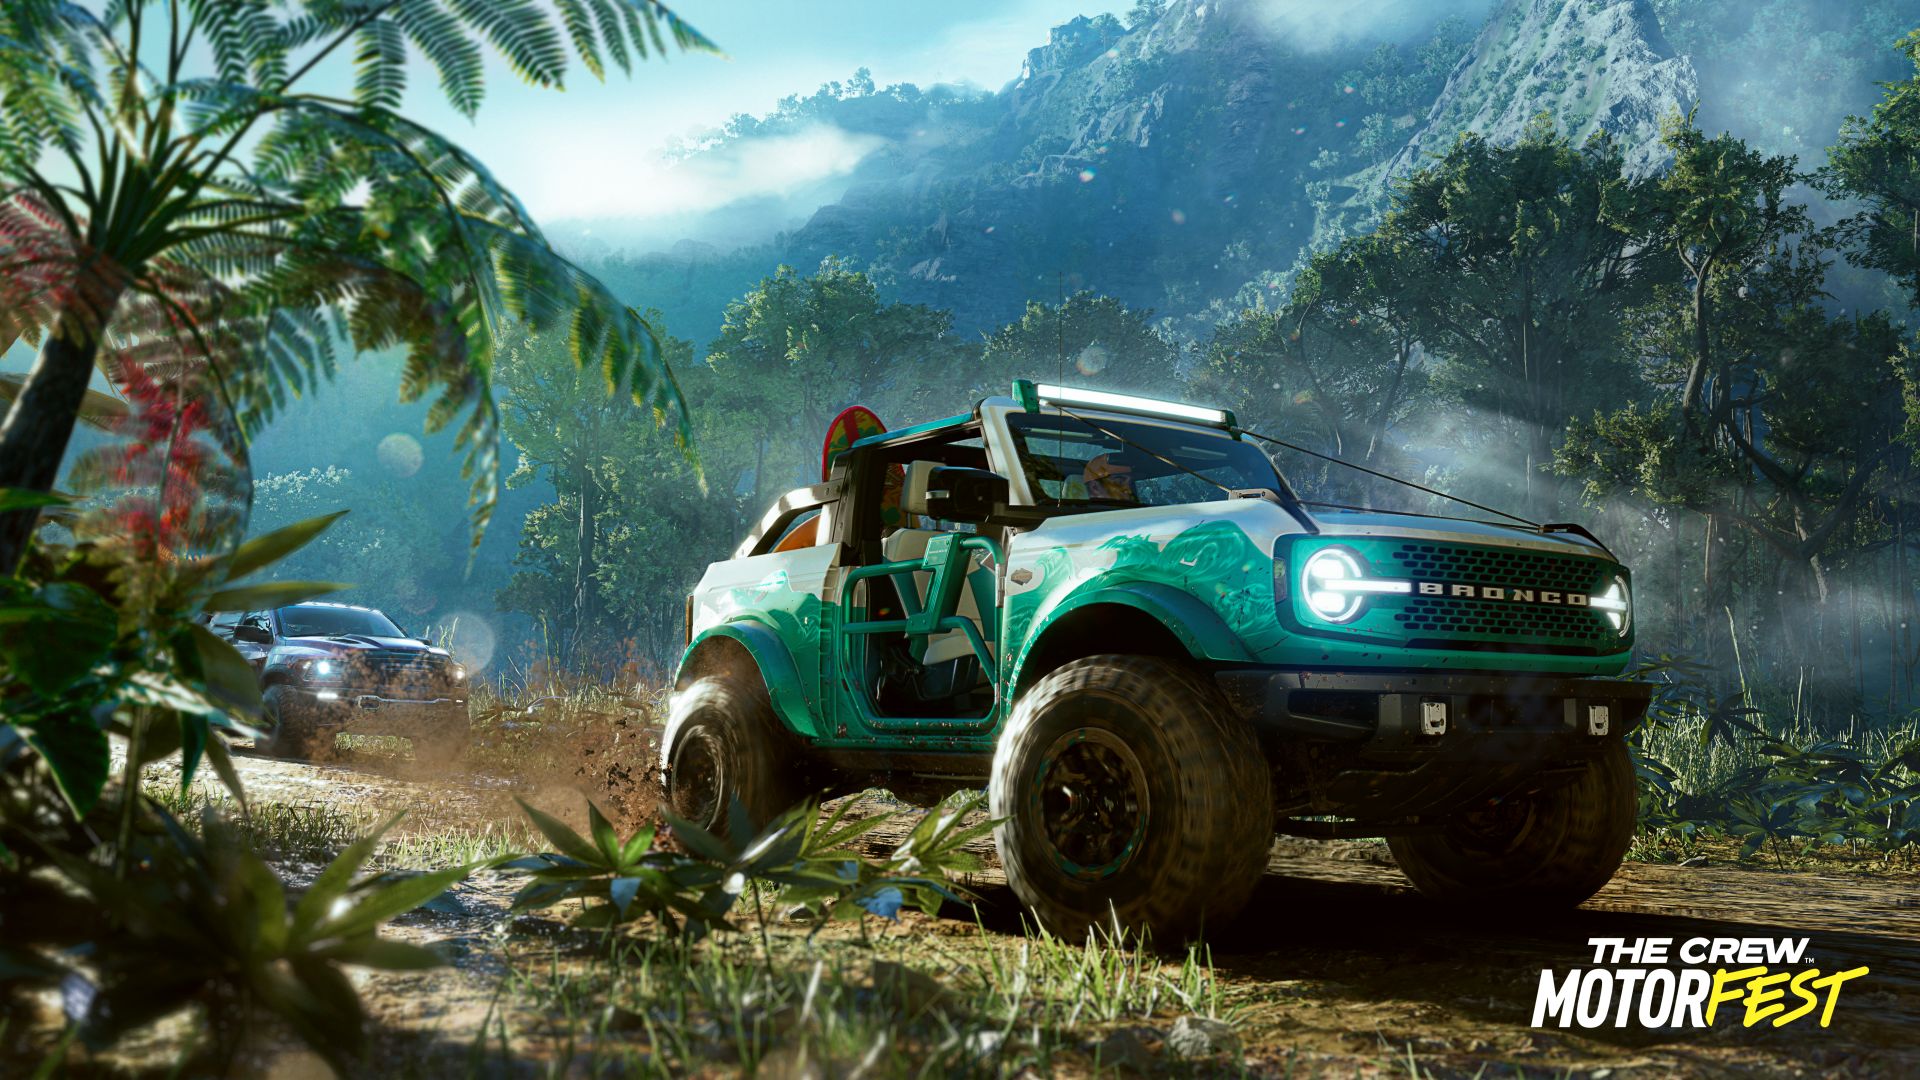 The Crew Motorfest Dev Diary Highlights the Open World of Oahu